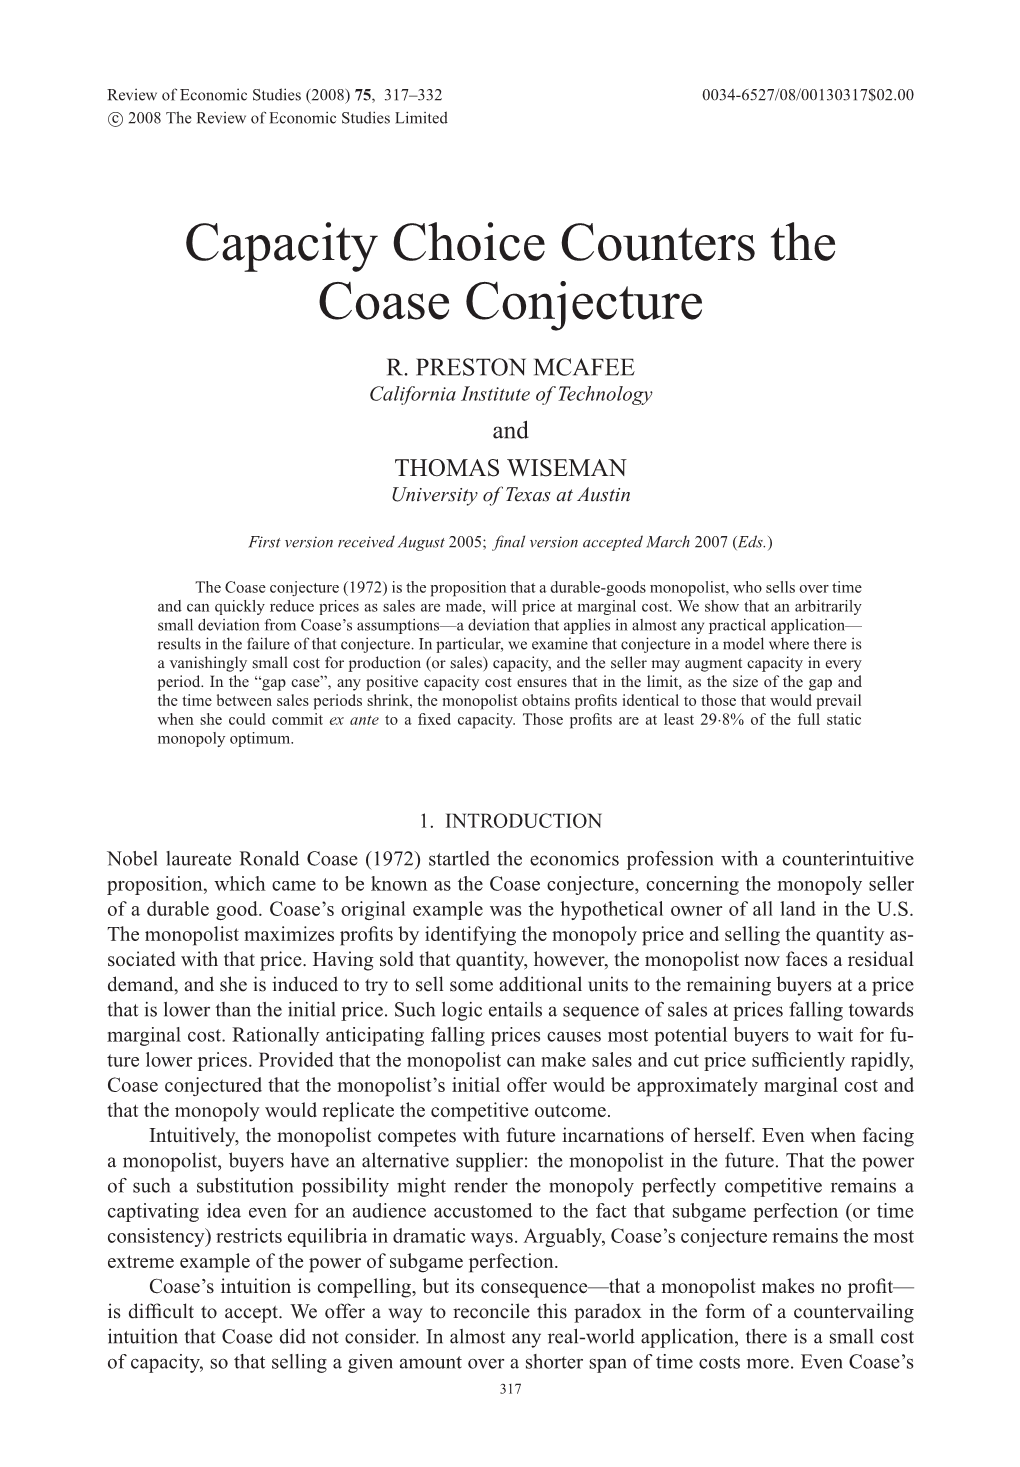 Capacity Choice Counters the Coase Conjecture R